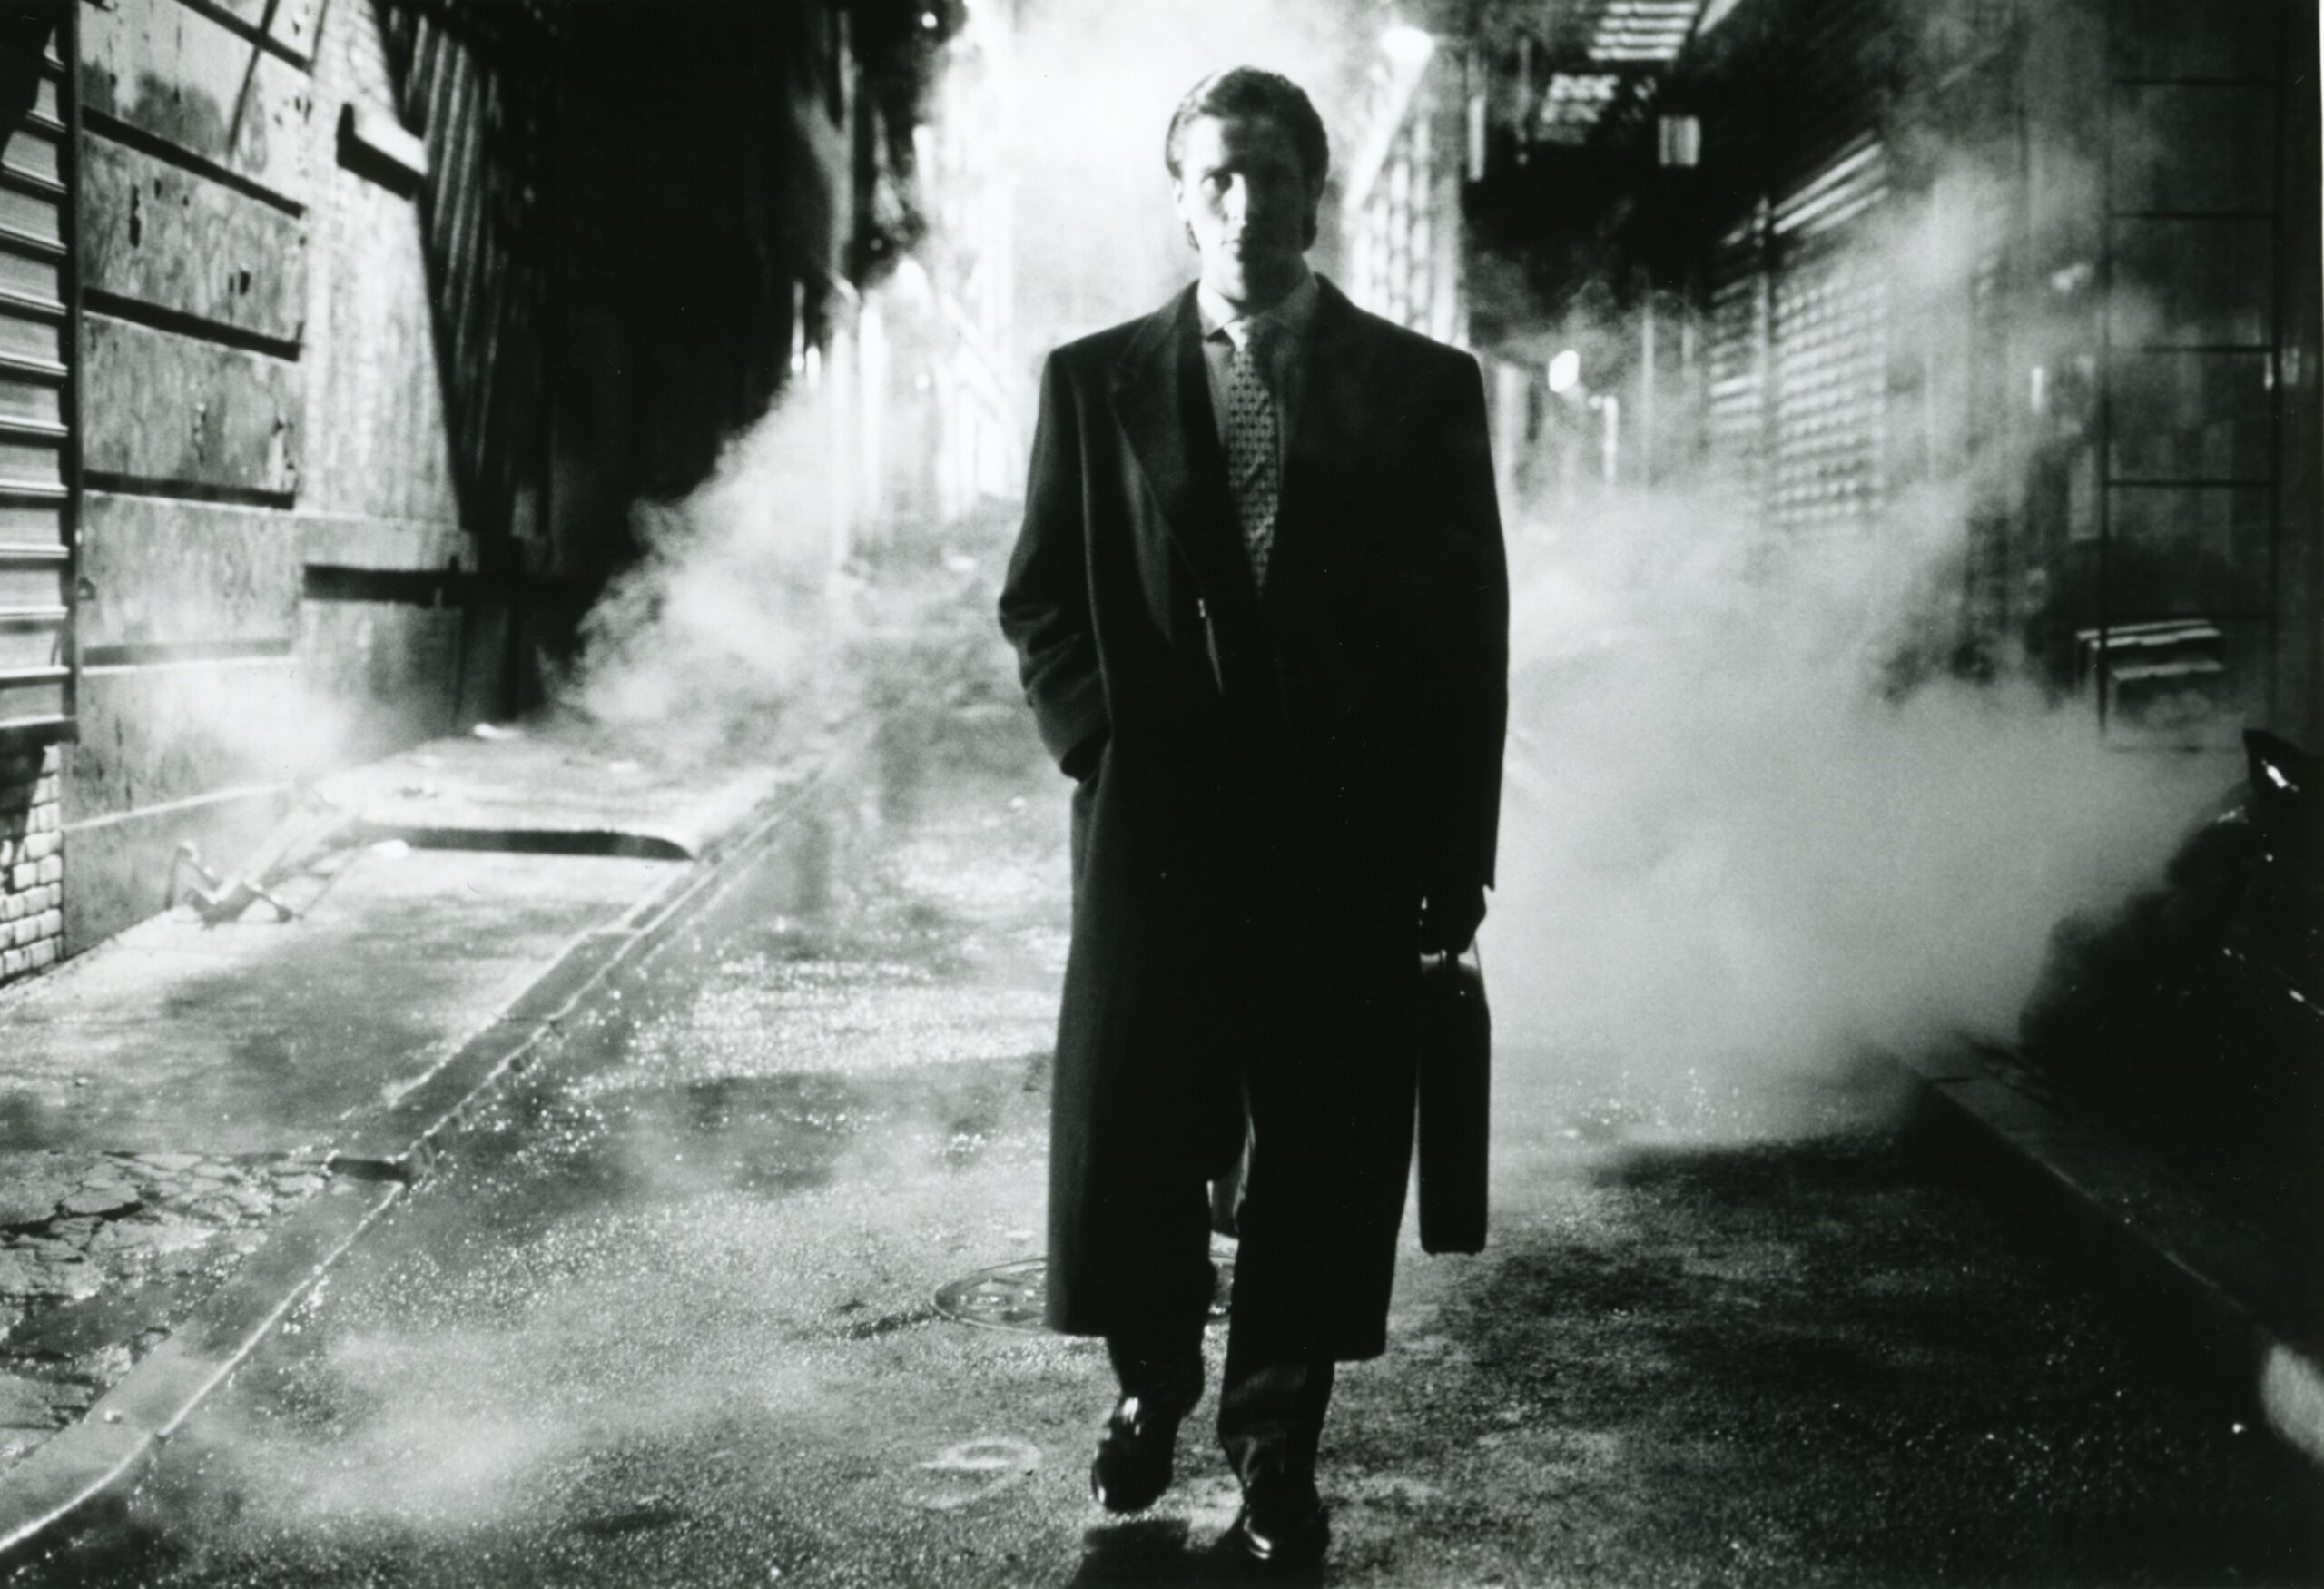 A black and white still of a man (Christian Bale) in a black suit with a long black coat, holding a briefcase. He is walking down a dark alley as smoke and fog surround him.